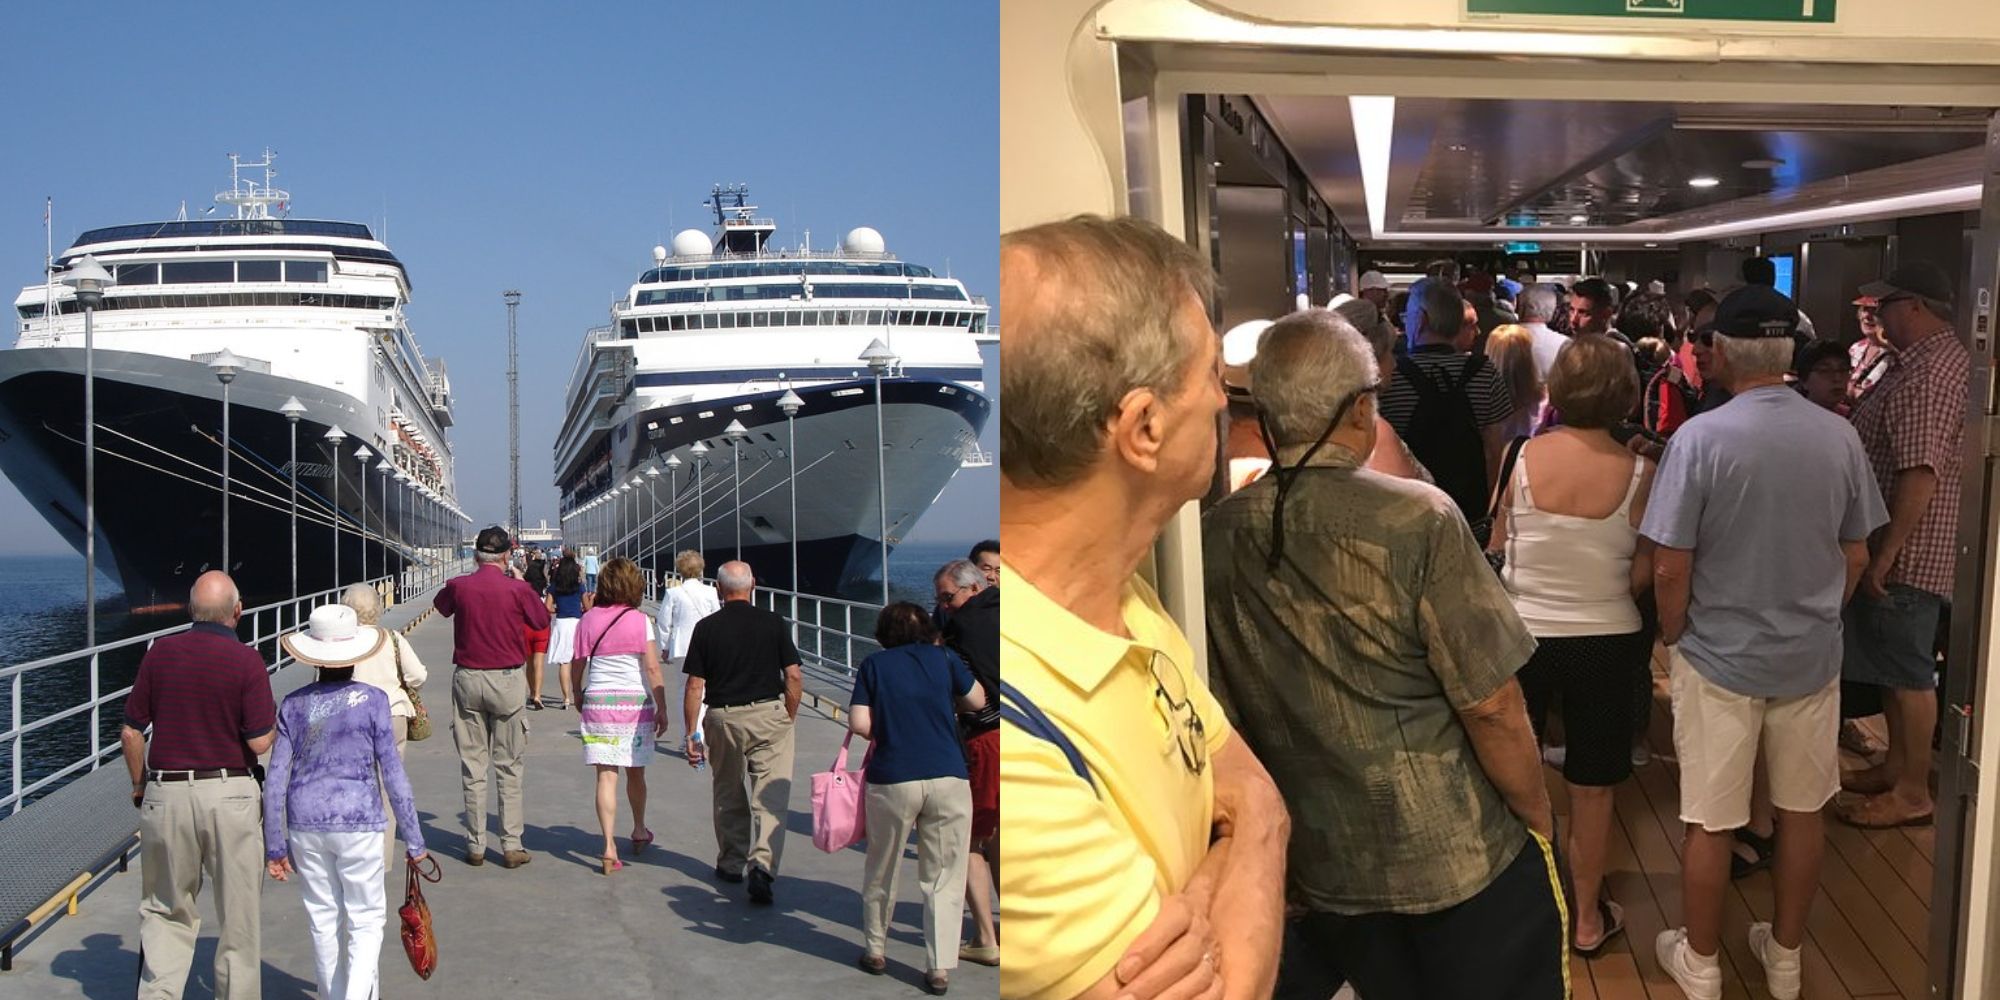 people walking and lining up on cruise ship